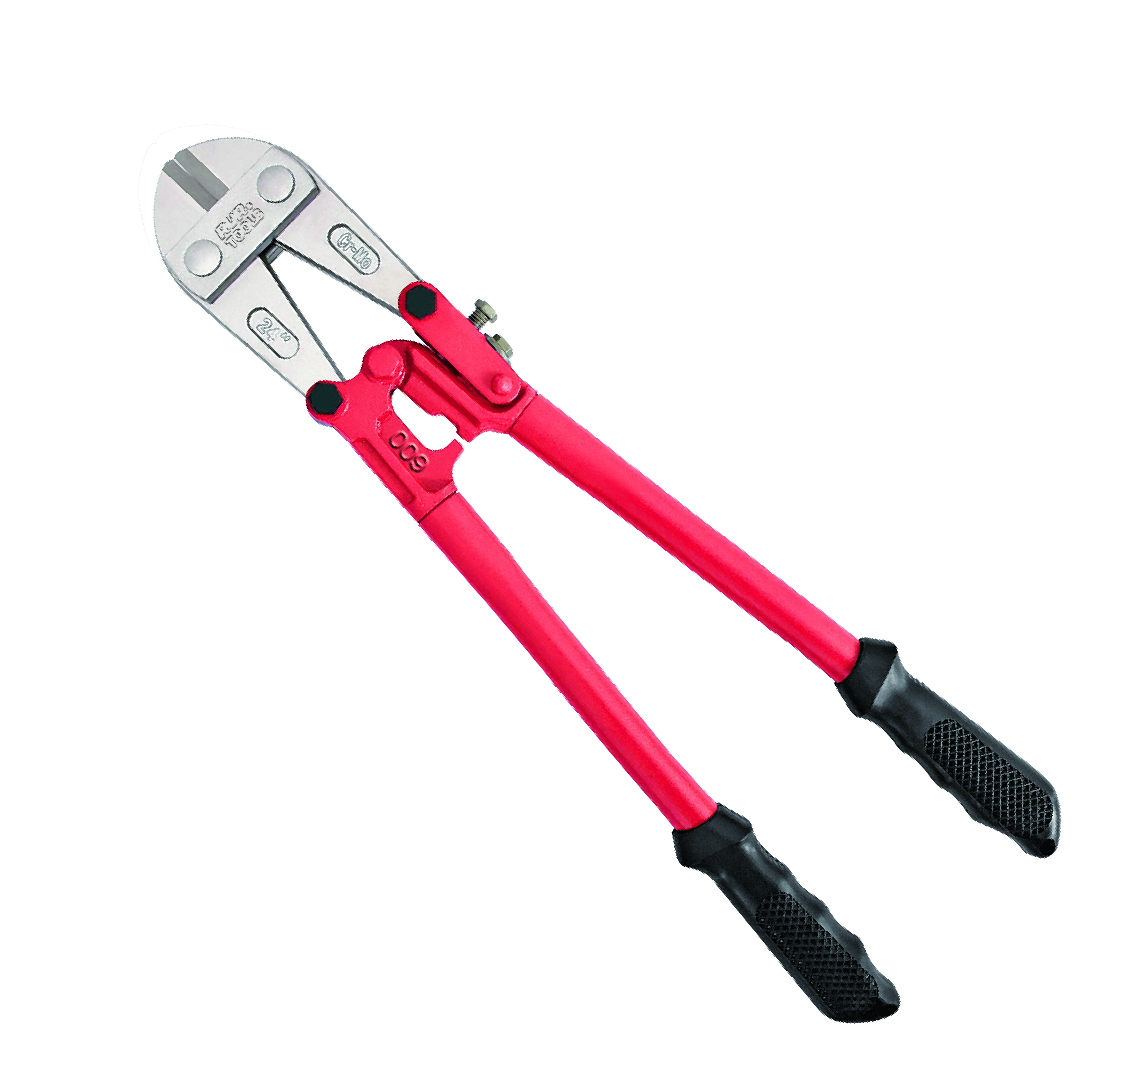 Well-designed 14 Inch Pipe Wrench - Overall Heat Treatment CR-MO Chrome-Molybdenum Steel Bolt Cutter – RUR